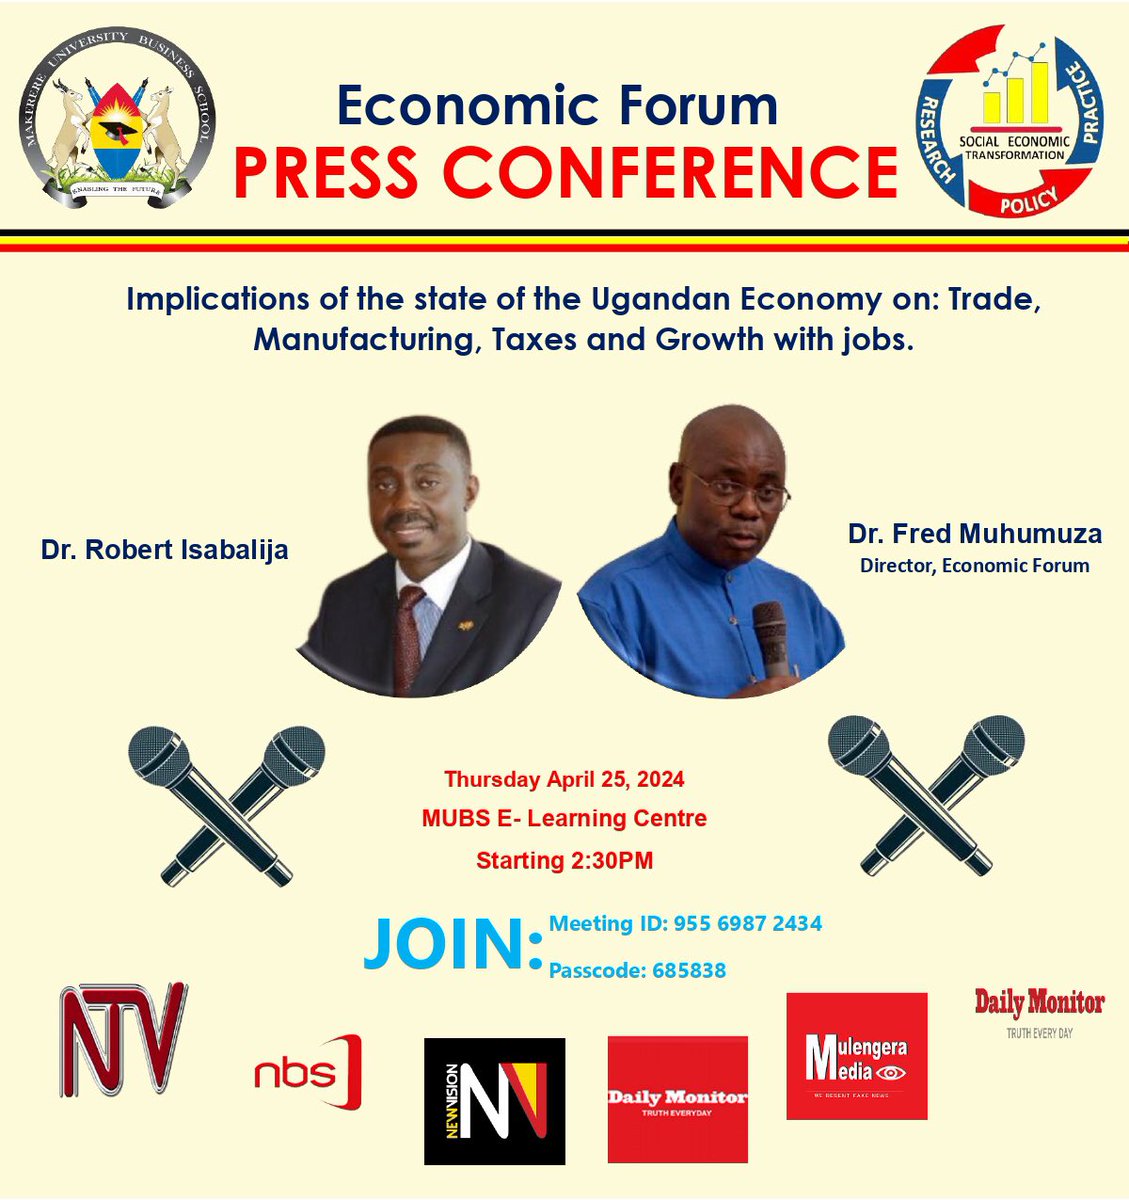 🎙️Press Conference❕ “Implications of the state of the Ugandan Economy on Trade, Manufacturing, Taxes and Growth with jobs” on Economic Forum Press Conference tomorrow starting 2:30PM at @OfficialMubs.